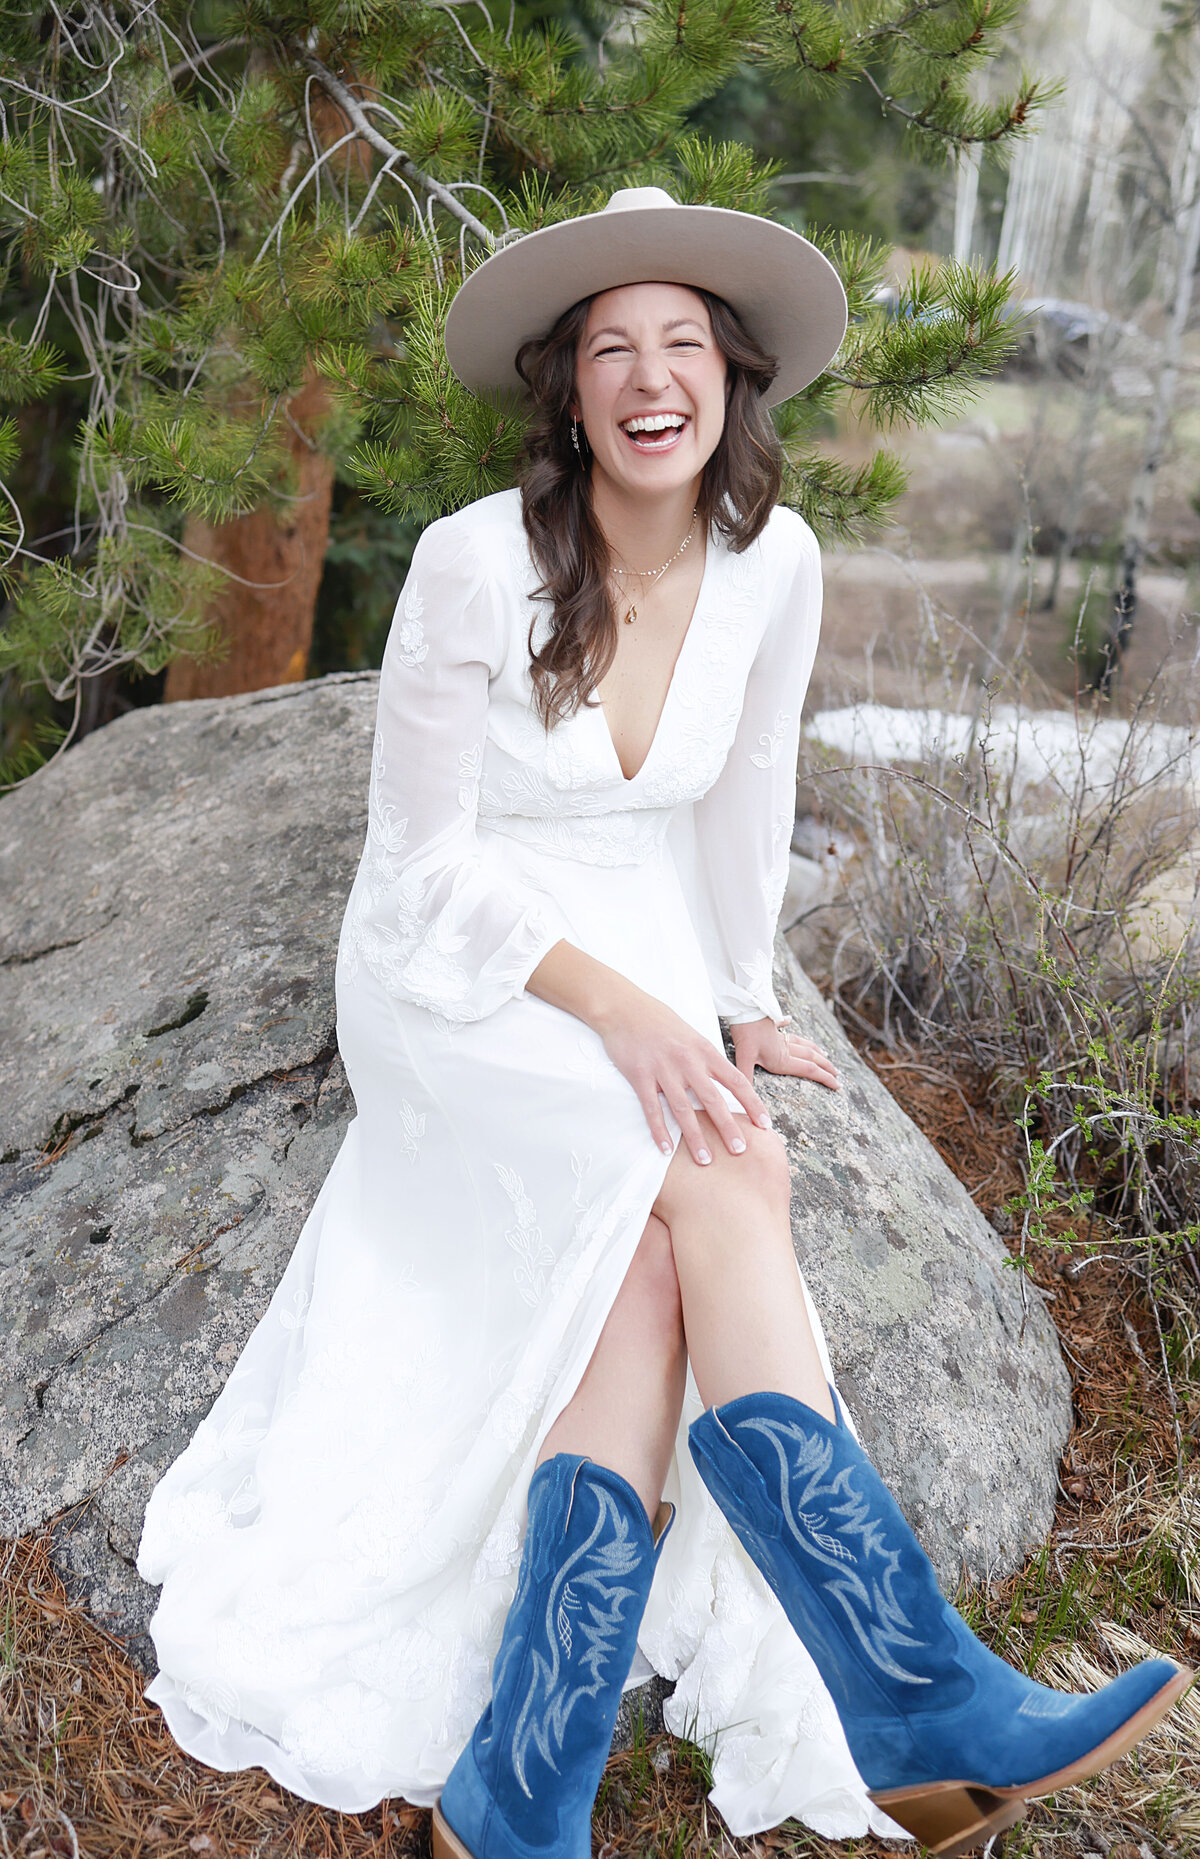 A bride laughs as she sits on a rock, showcasing her adorable blue cowboy boots and smile.